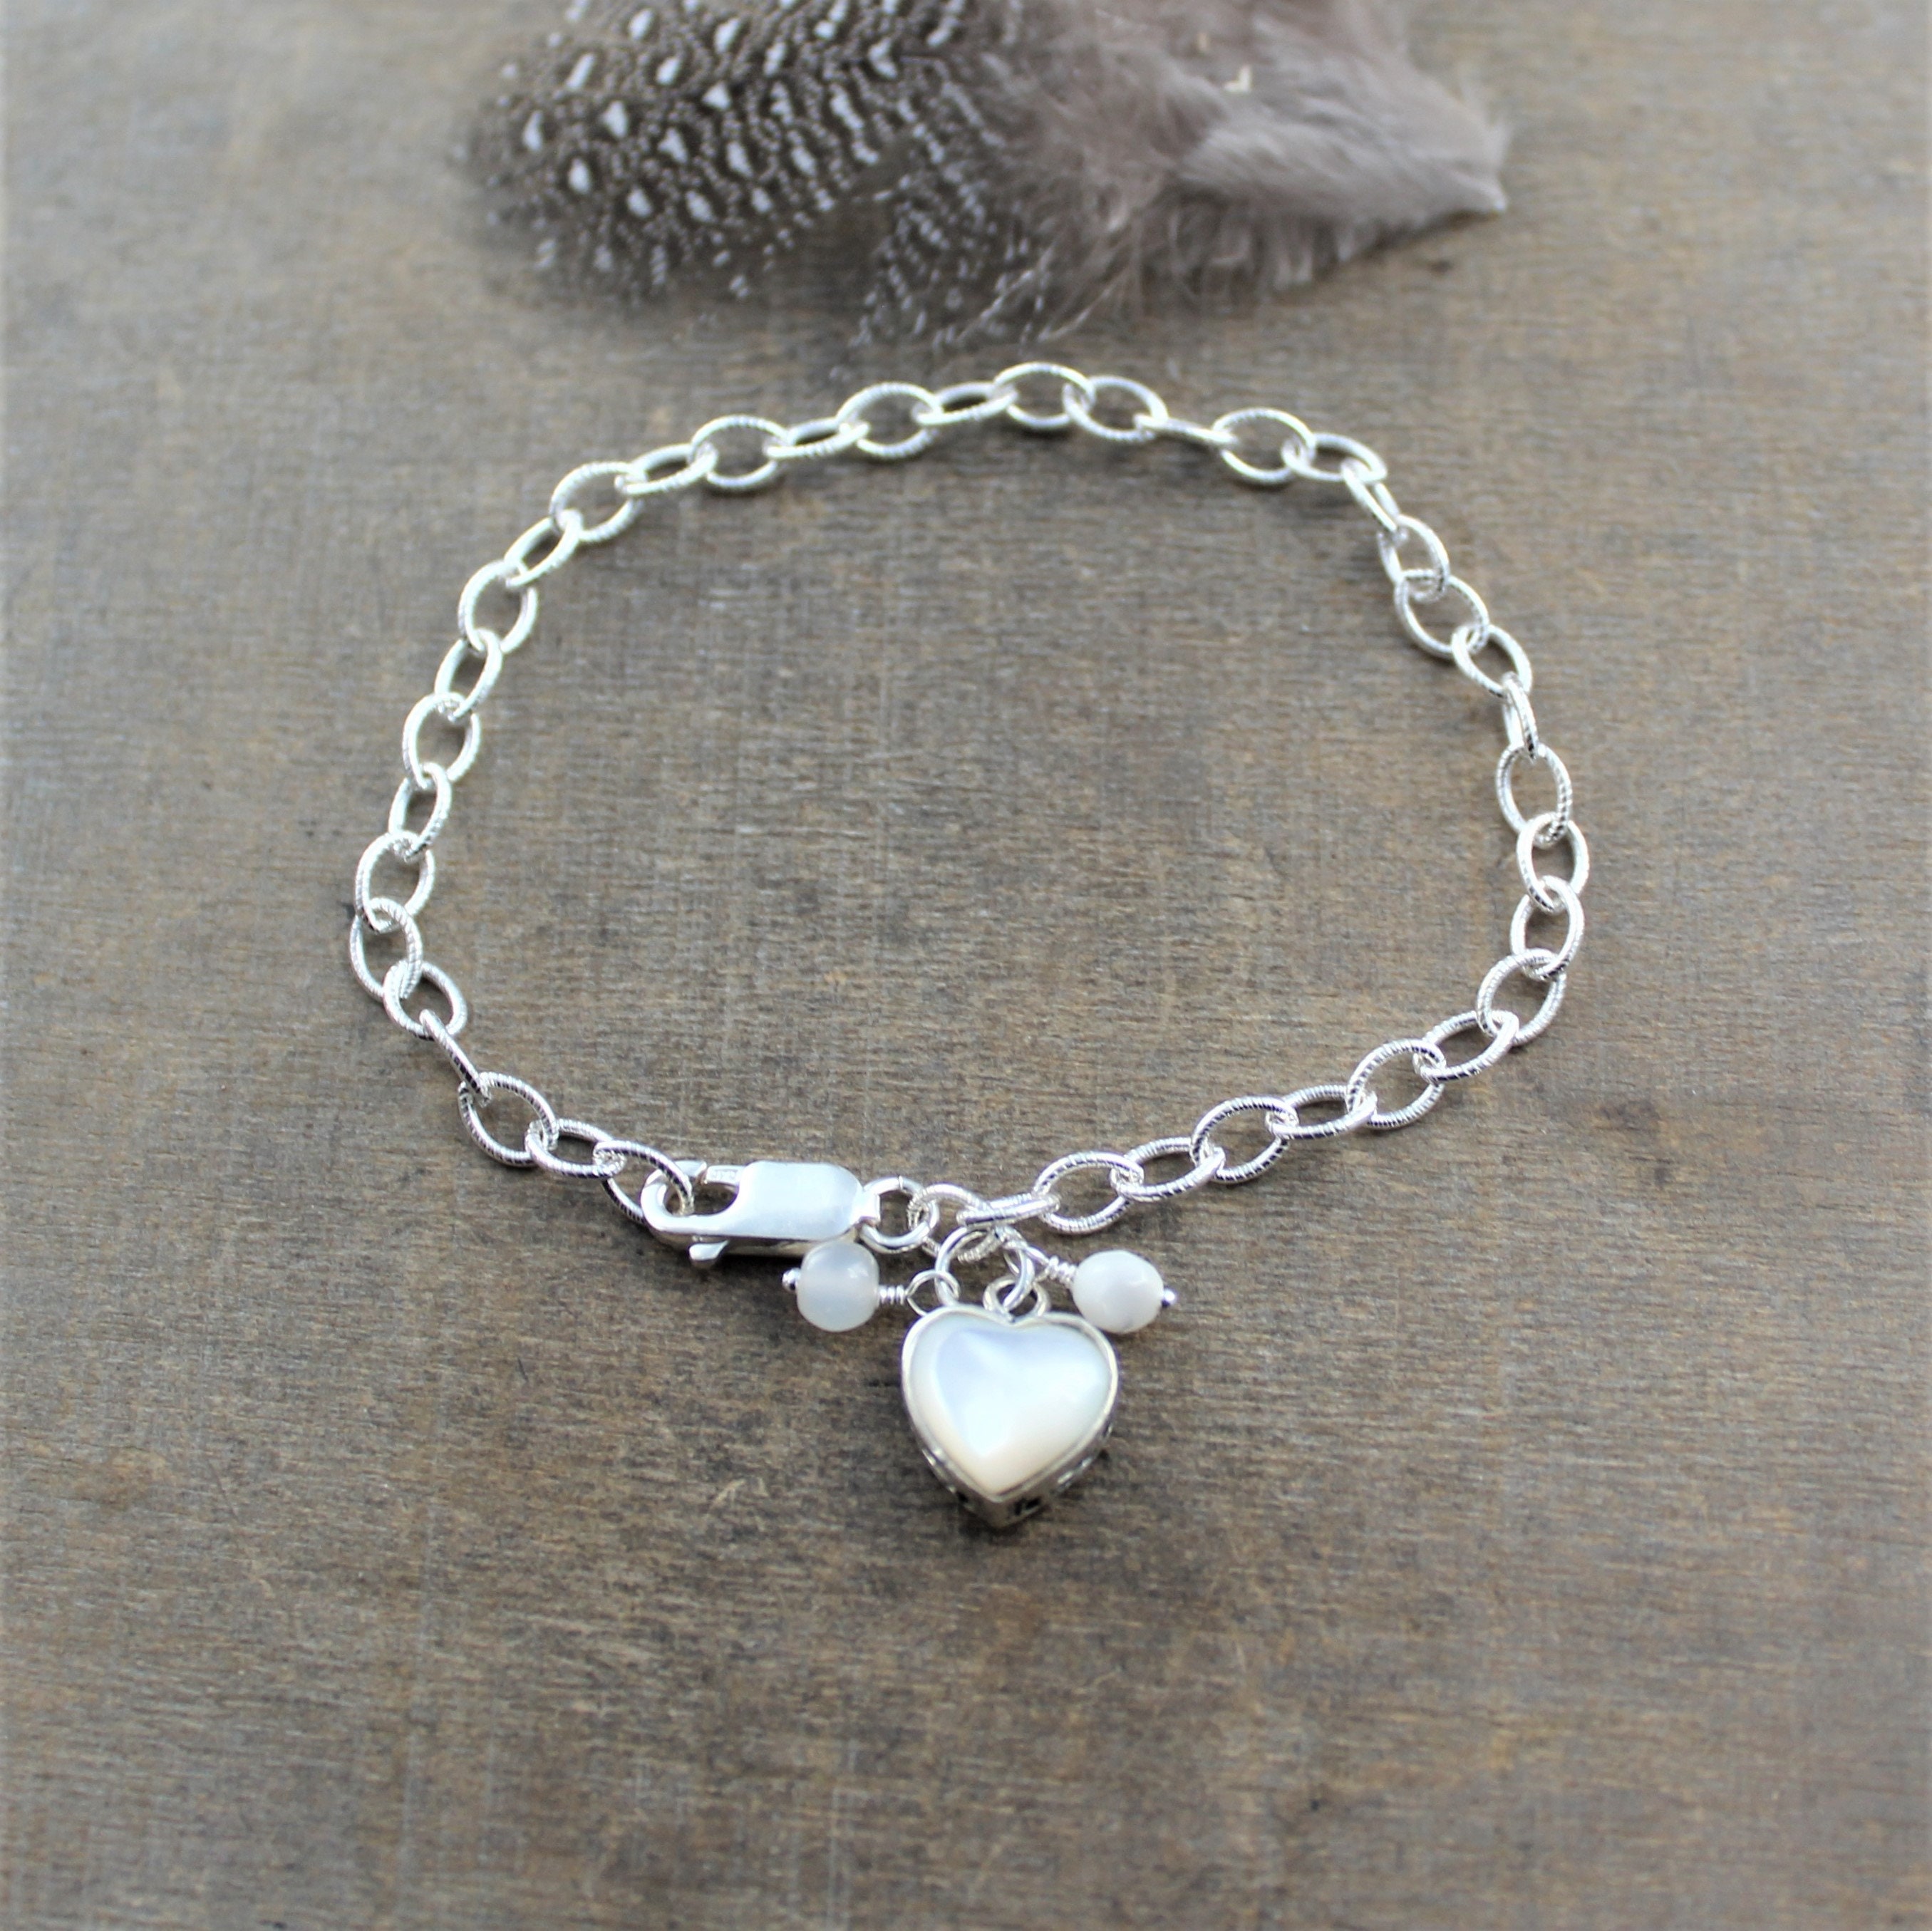 Delicate Heart Chain Bracelet - Chocolate and Steel